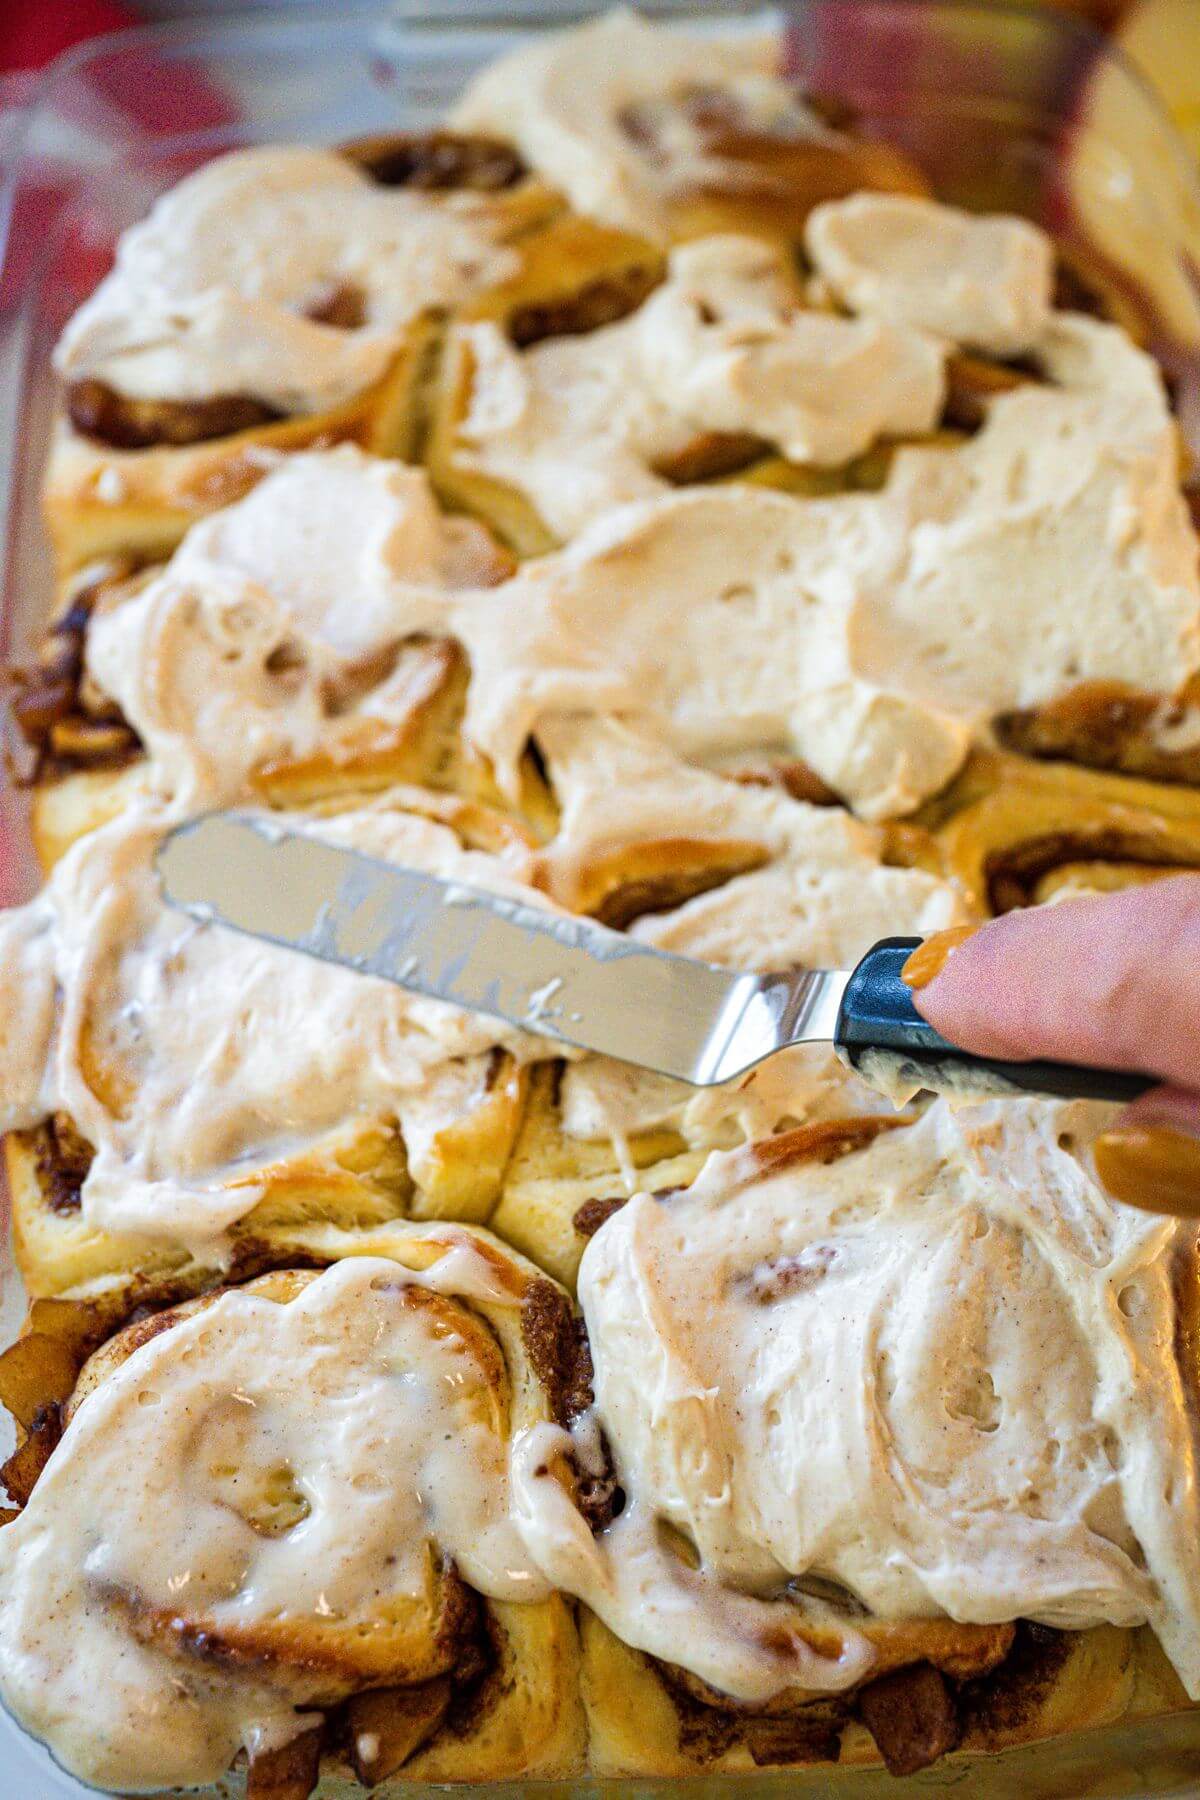 Someone is icing pan of cinnamon rolls with apple pie filling.